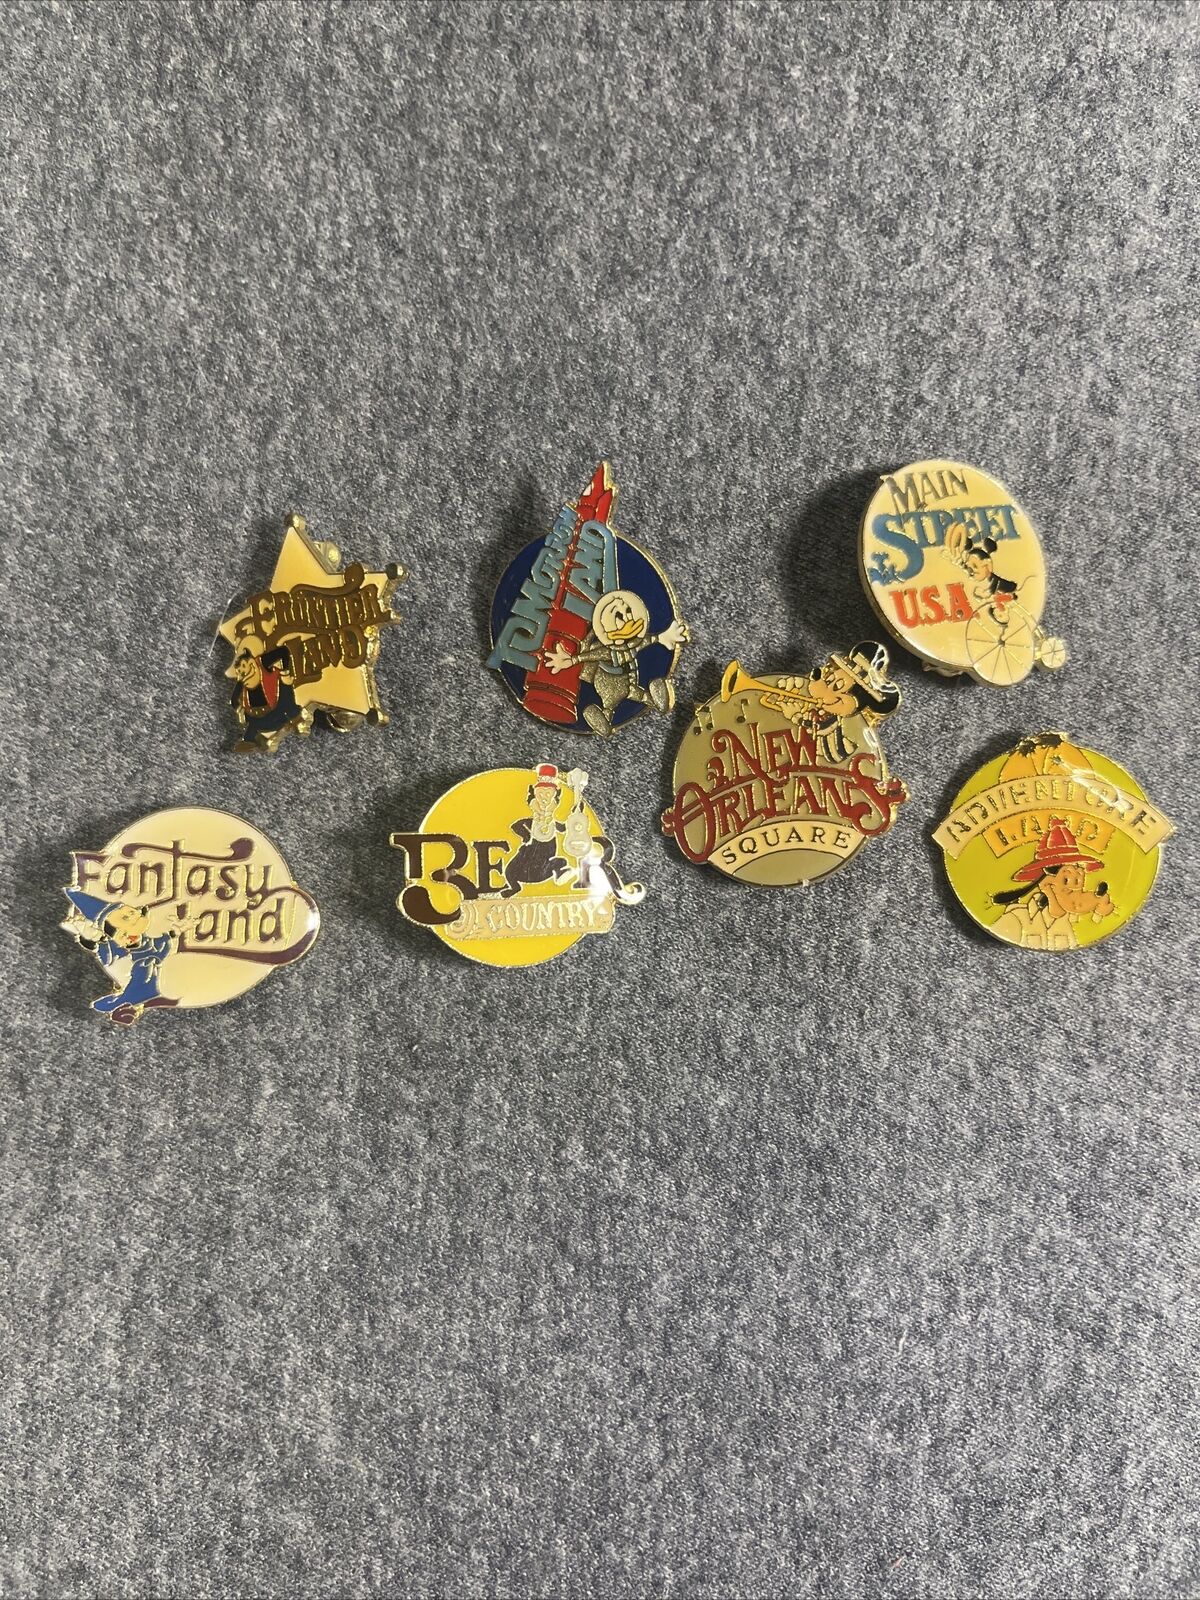 Lot of 7 Set Vintage 1980s Anaheim Disneyland Pins - Ships From CA  The Lands